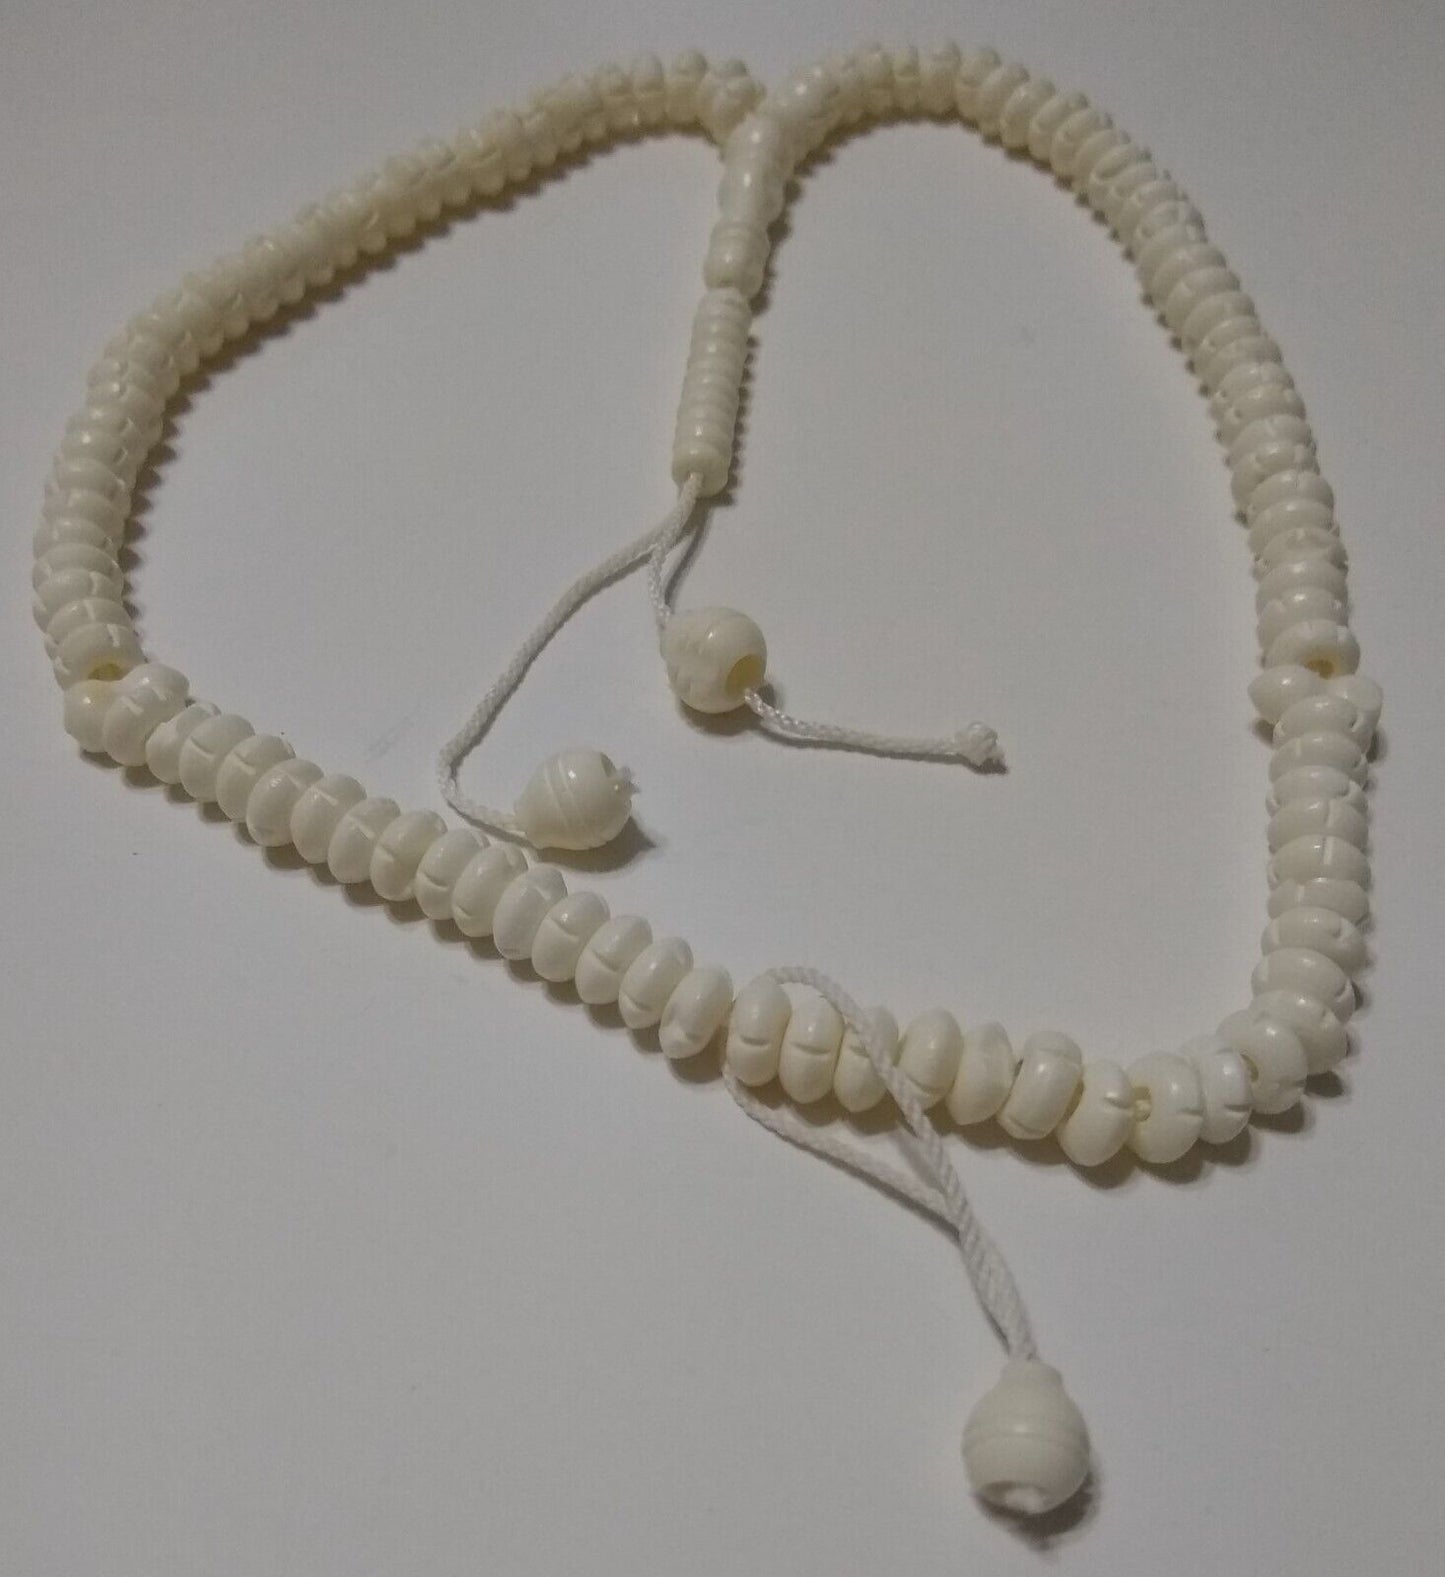 CAMEL BONE Prayer Beads-99 Beads + 2 Counters+ 8 Extra Counters on the Top CBPBM